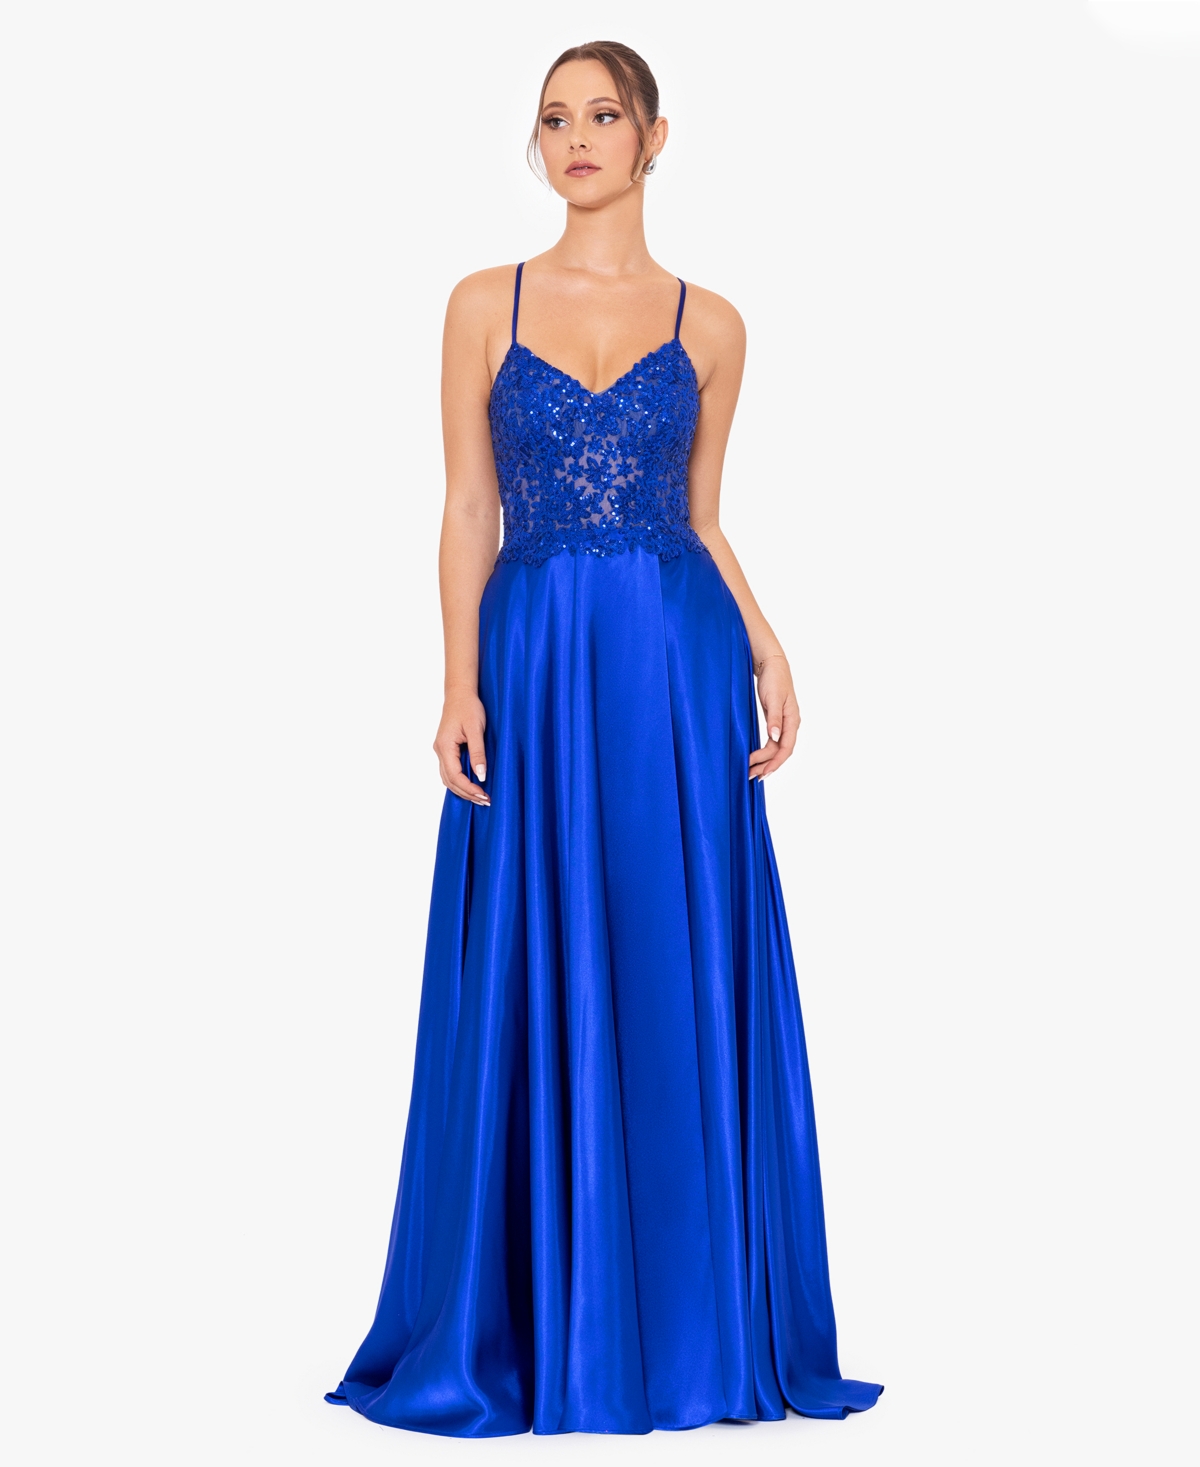 Juniors' Sequin-Bodice Sleeveless Gown - Royal